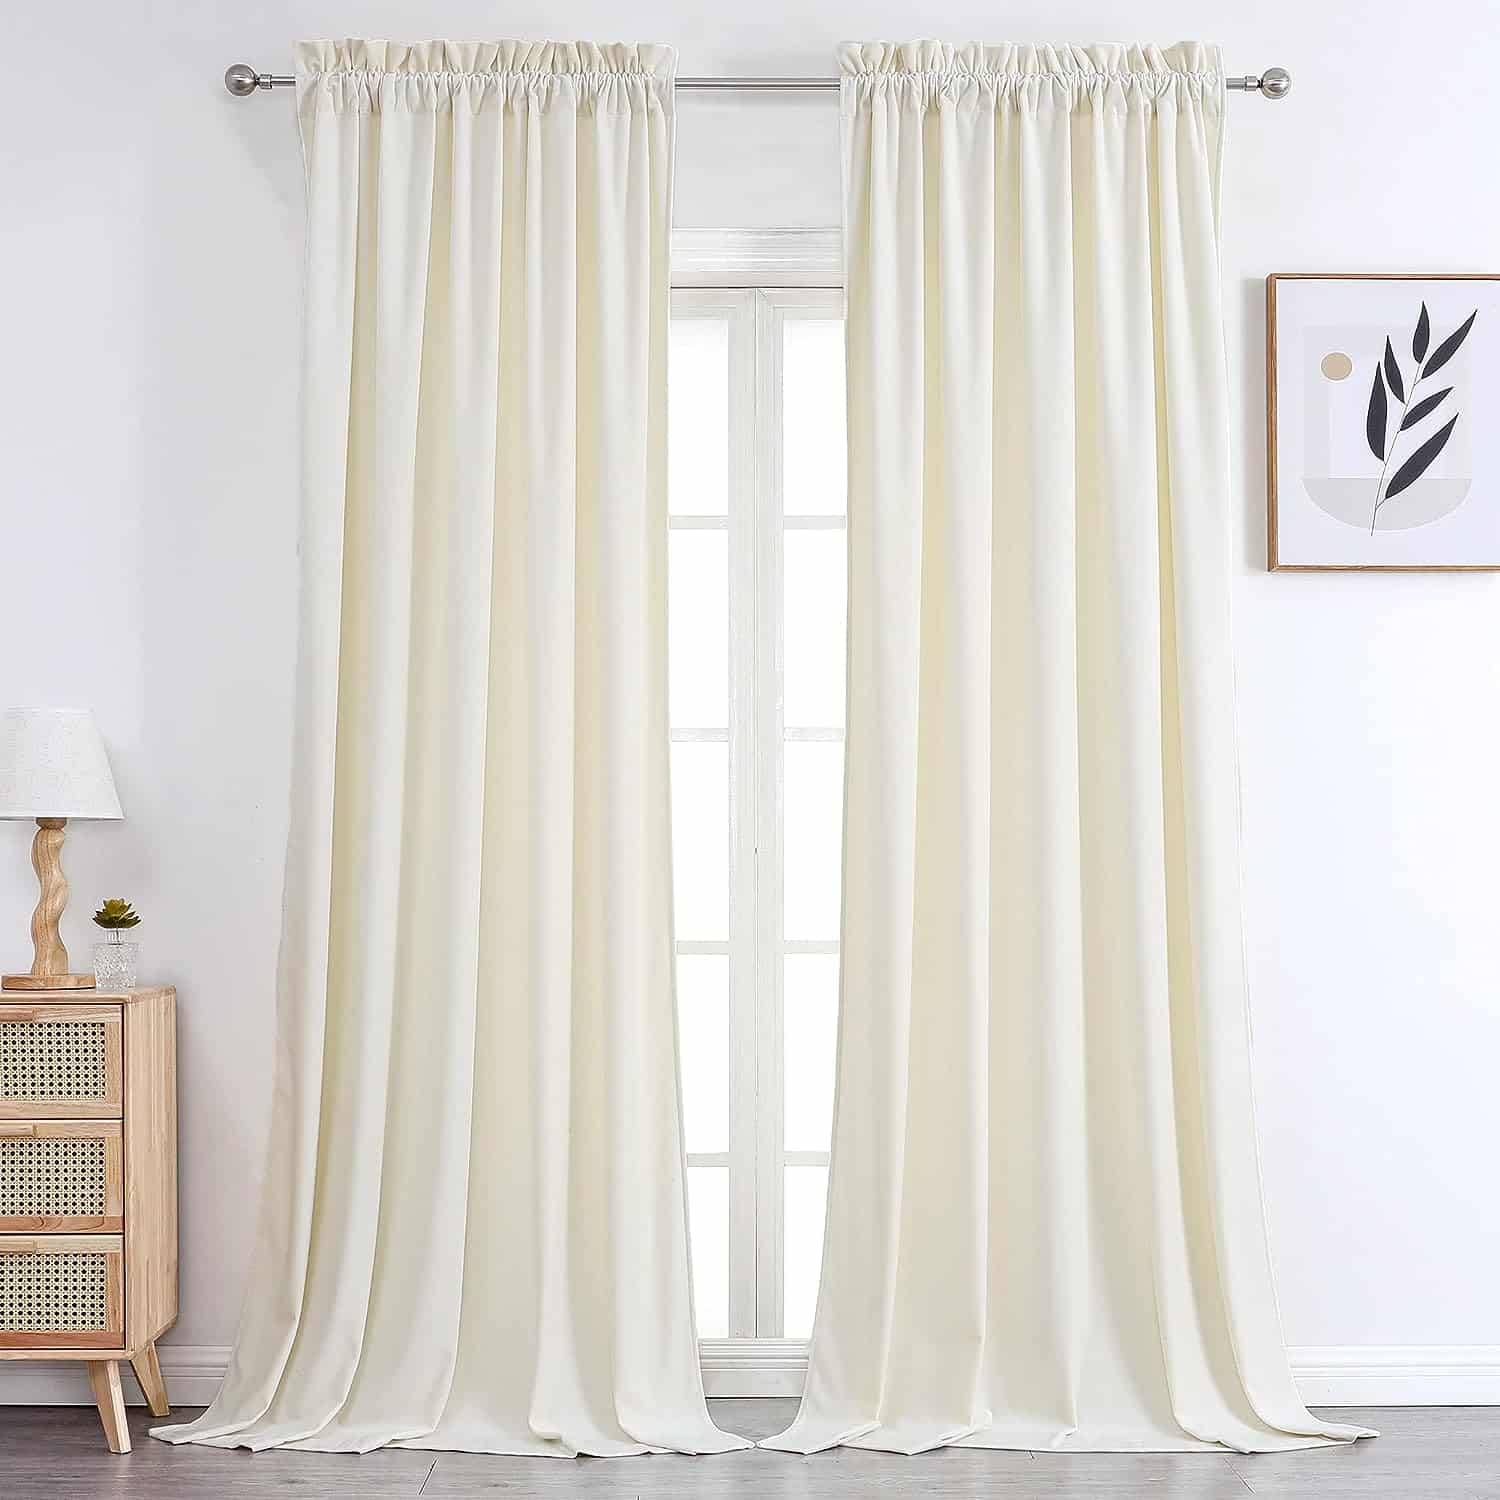 curtains from amazon for living room